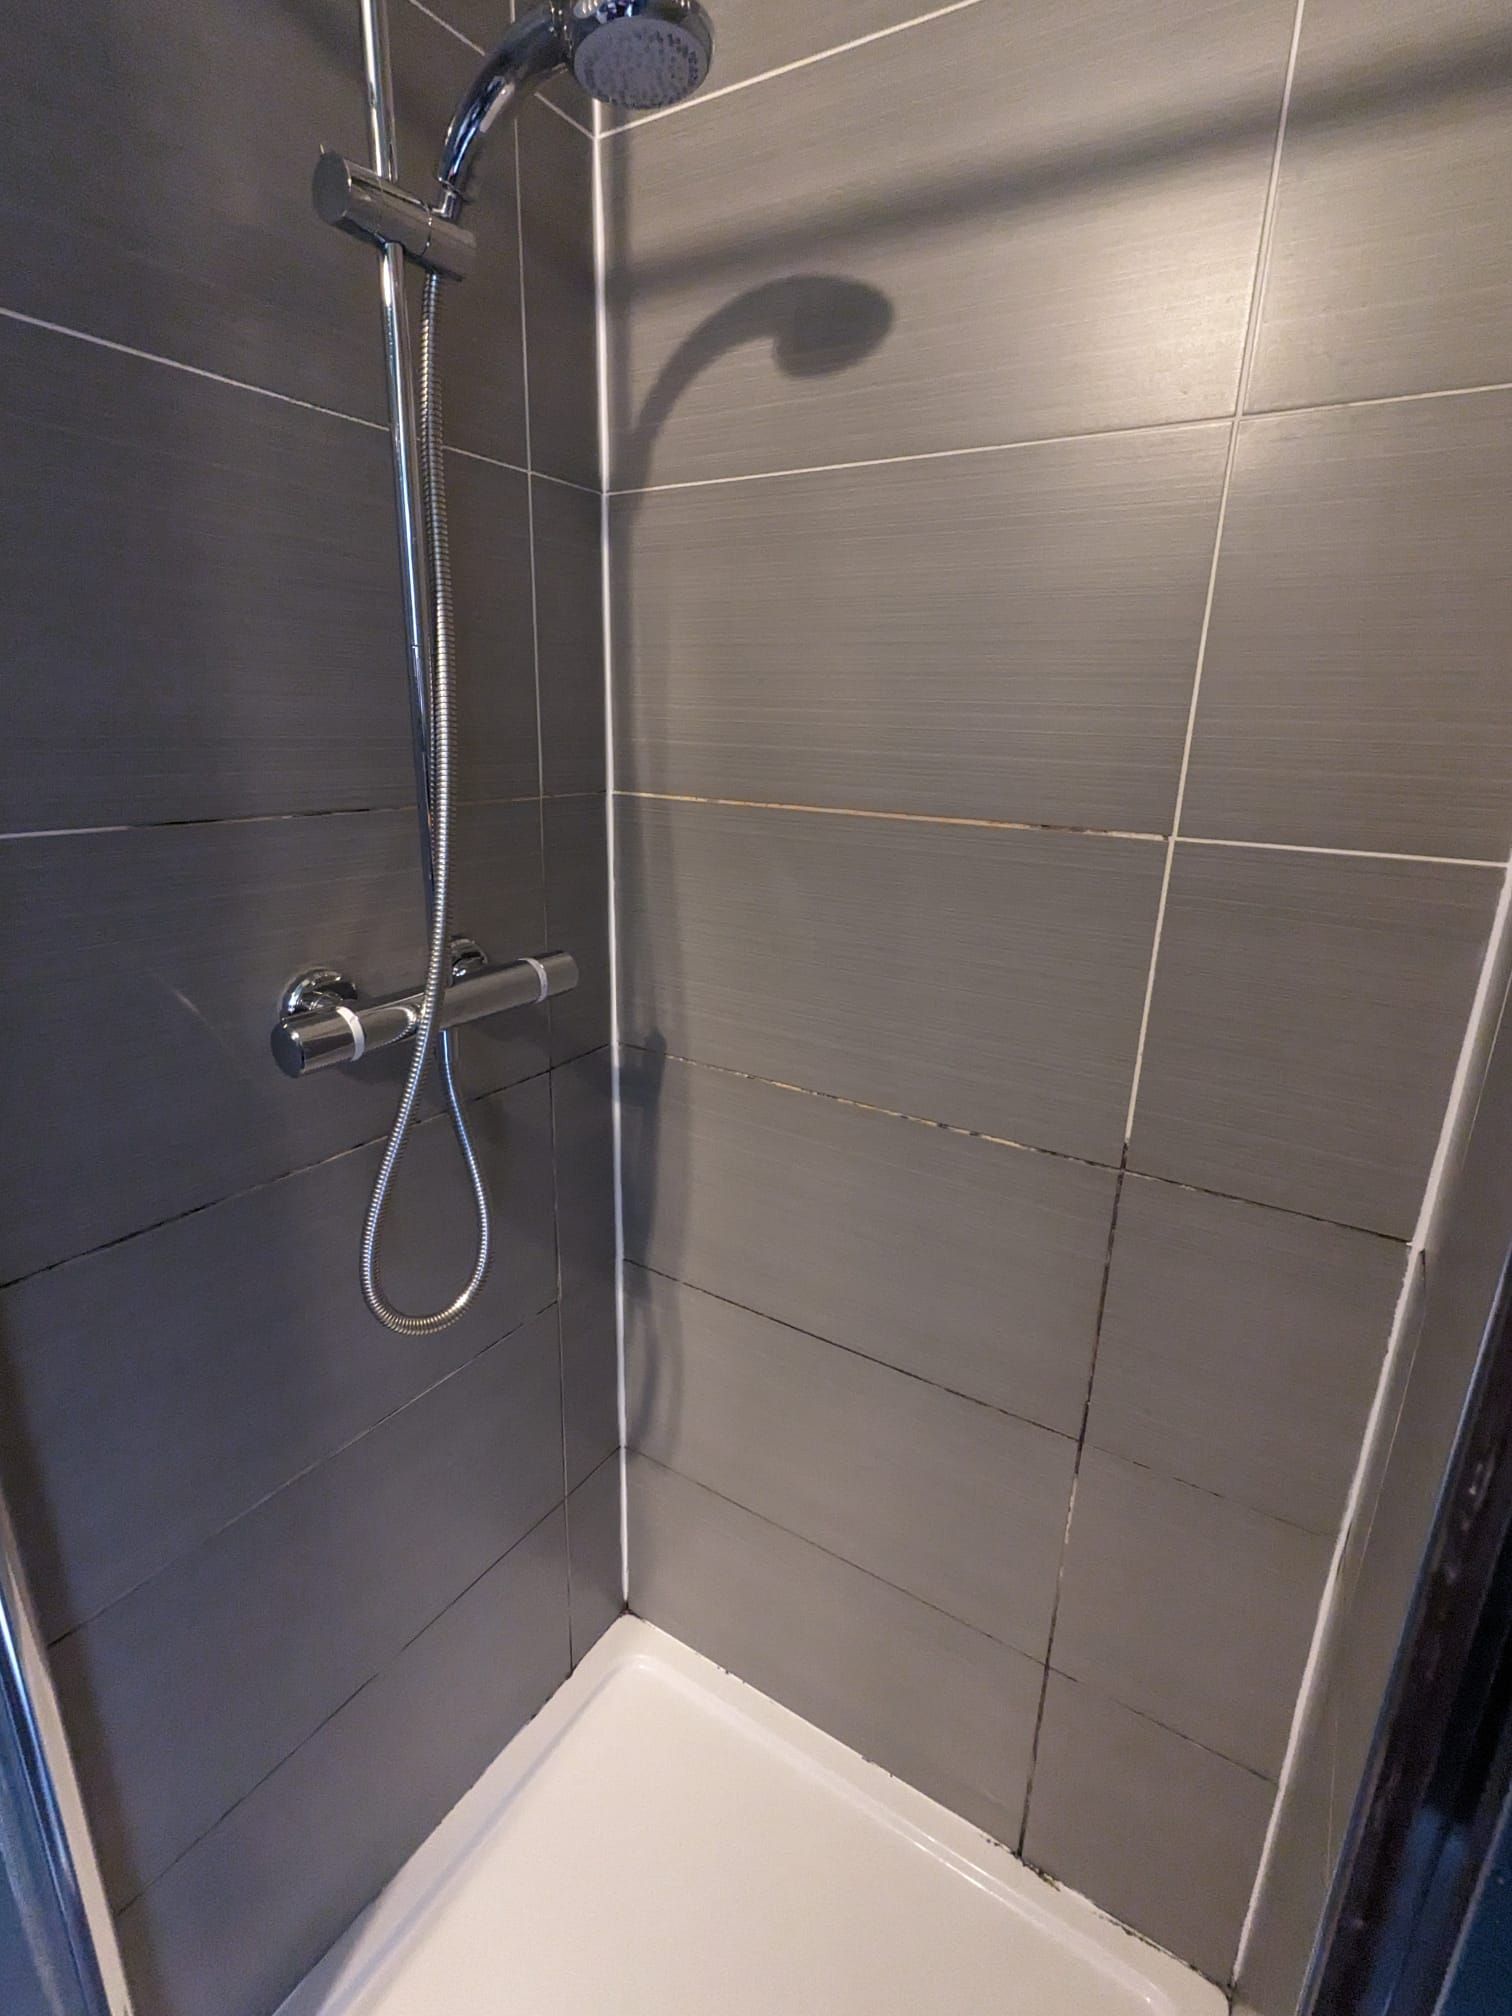 Bathroom shower cubicle restoration grout deep cleaning sealing silicone sealant replacement